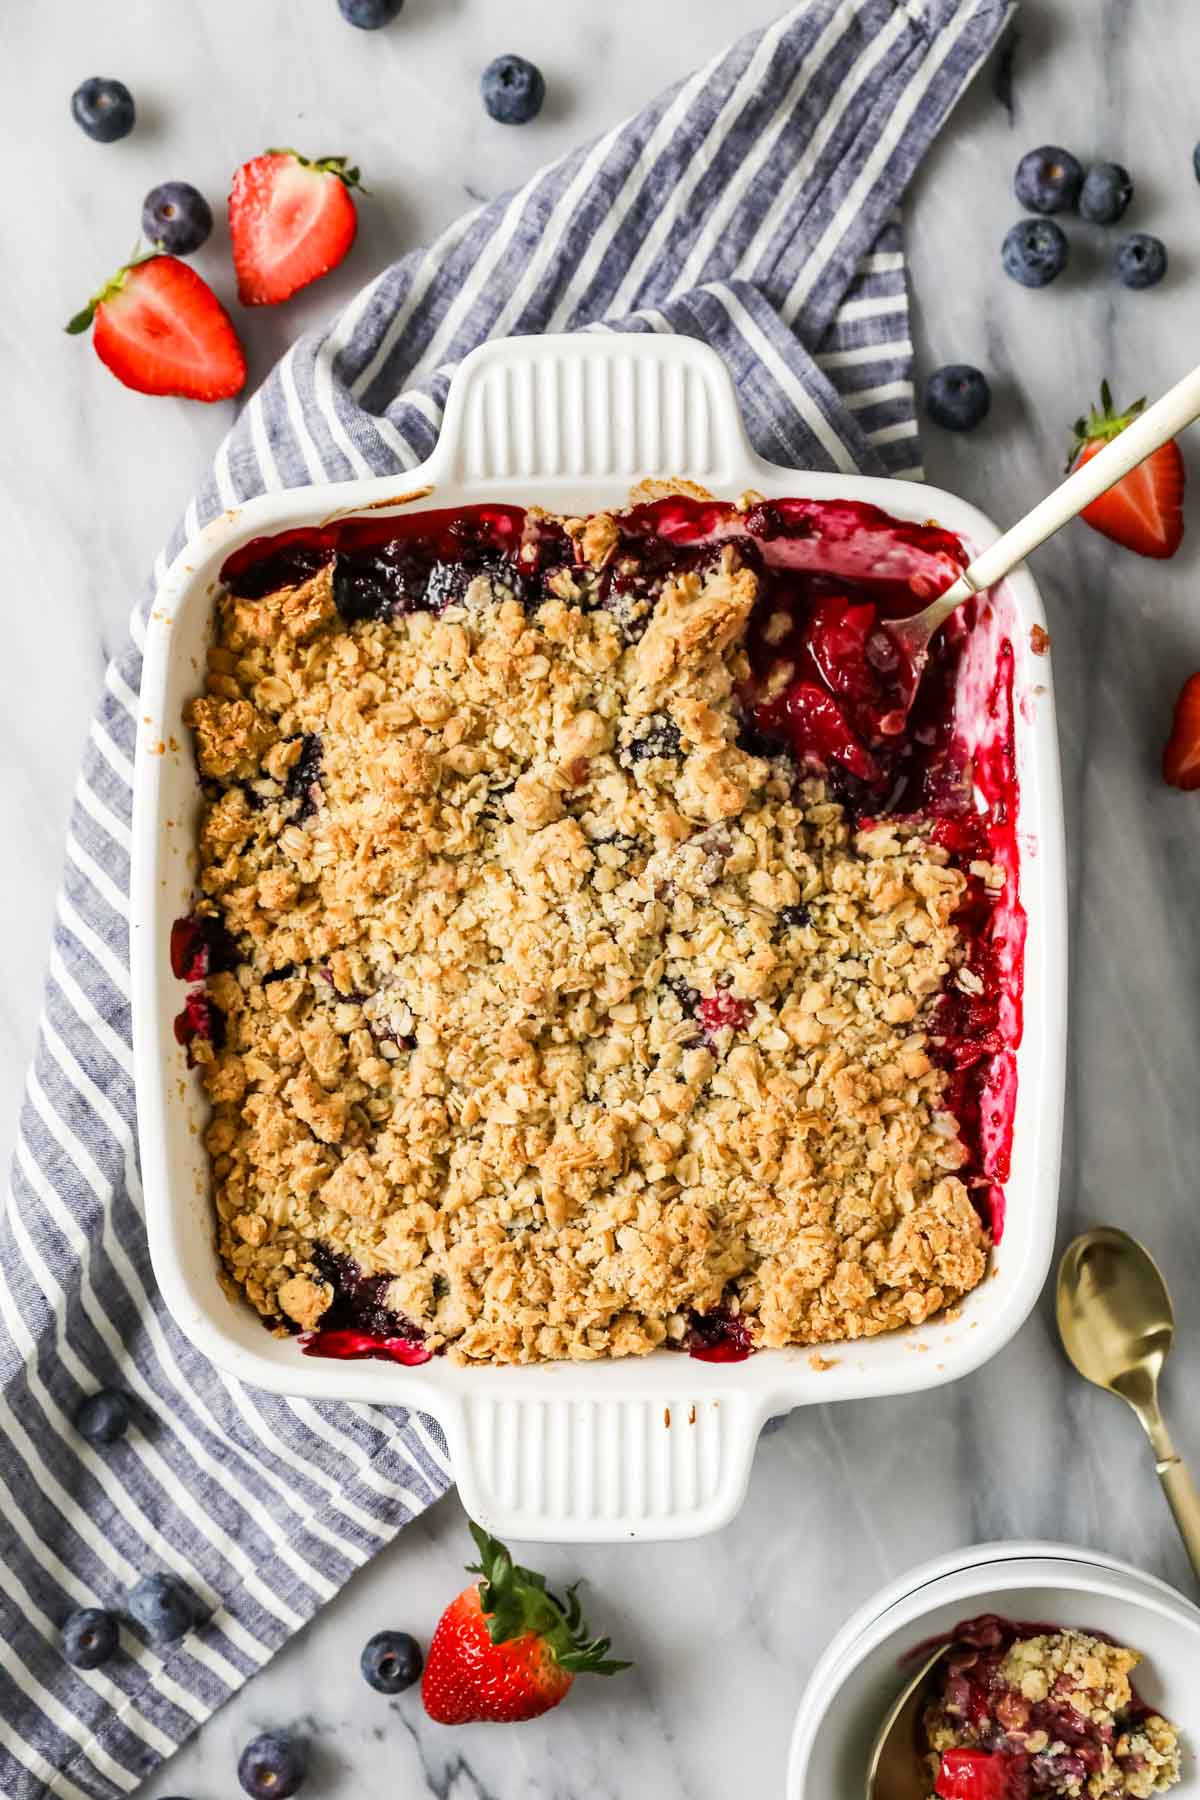 Overhead view of a square baking dish with a baked berry dessert topped with an oat crisp.